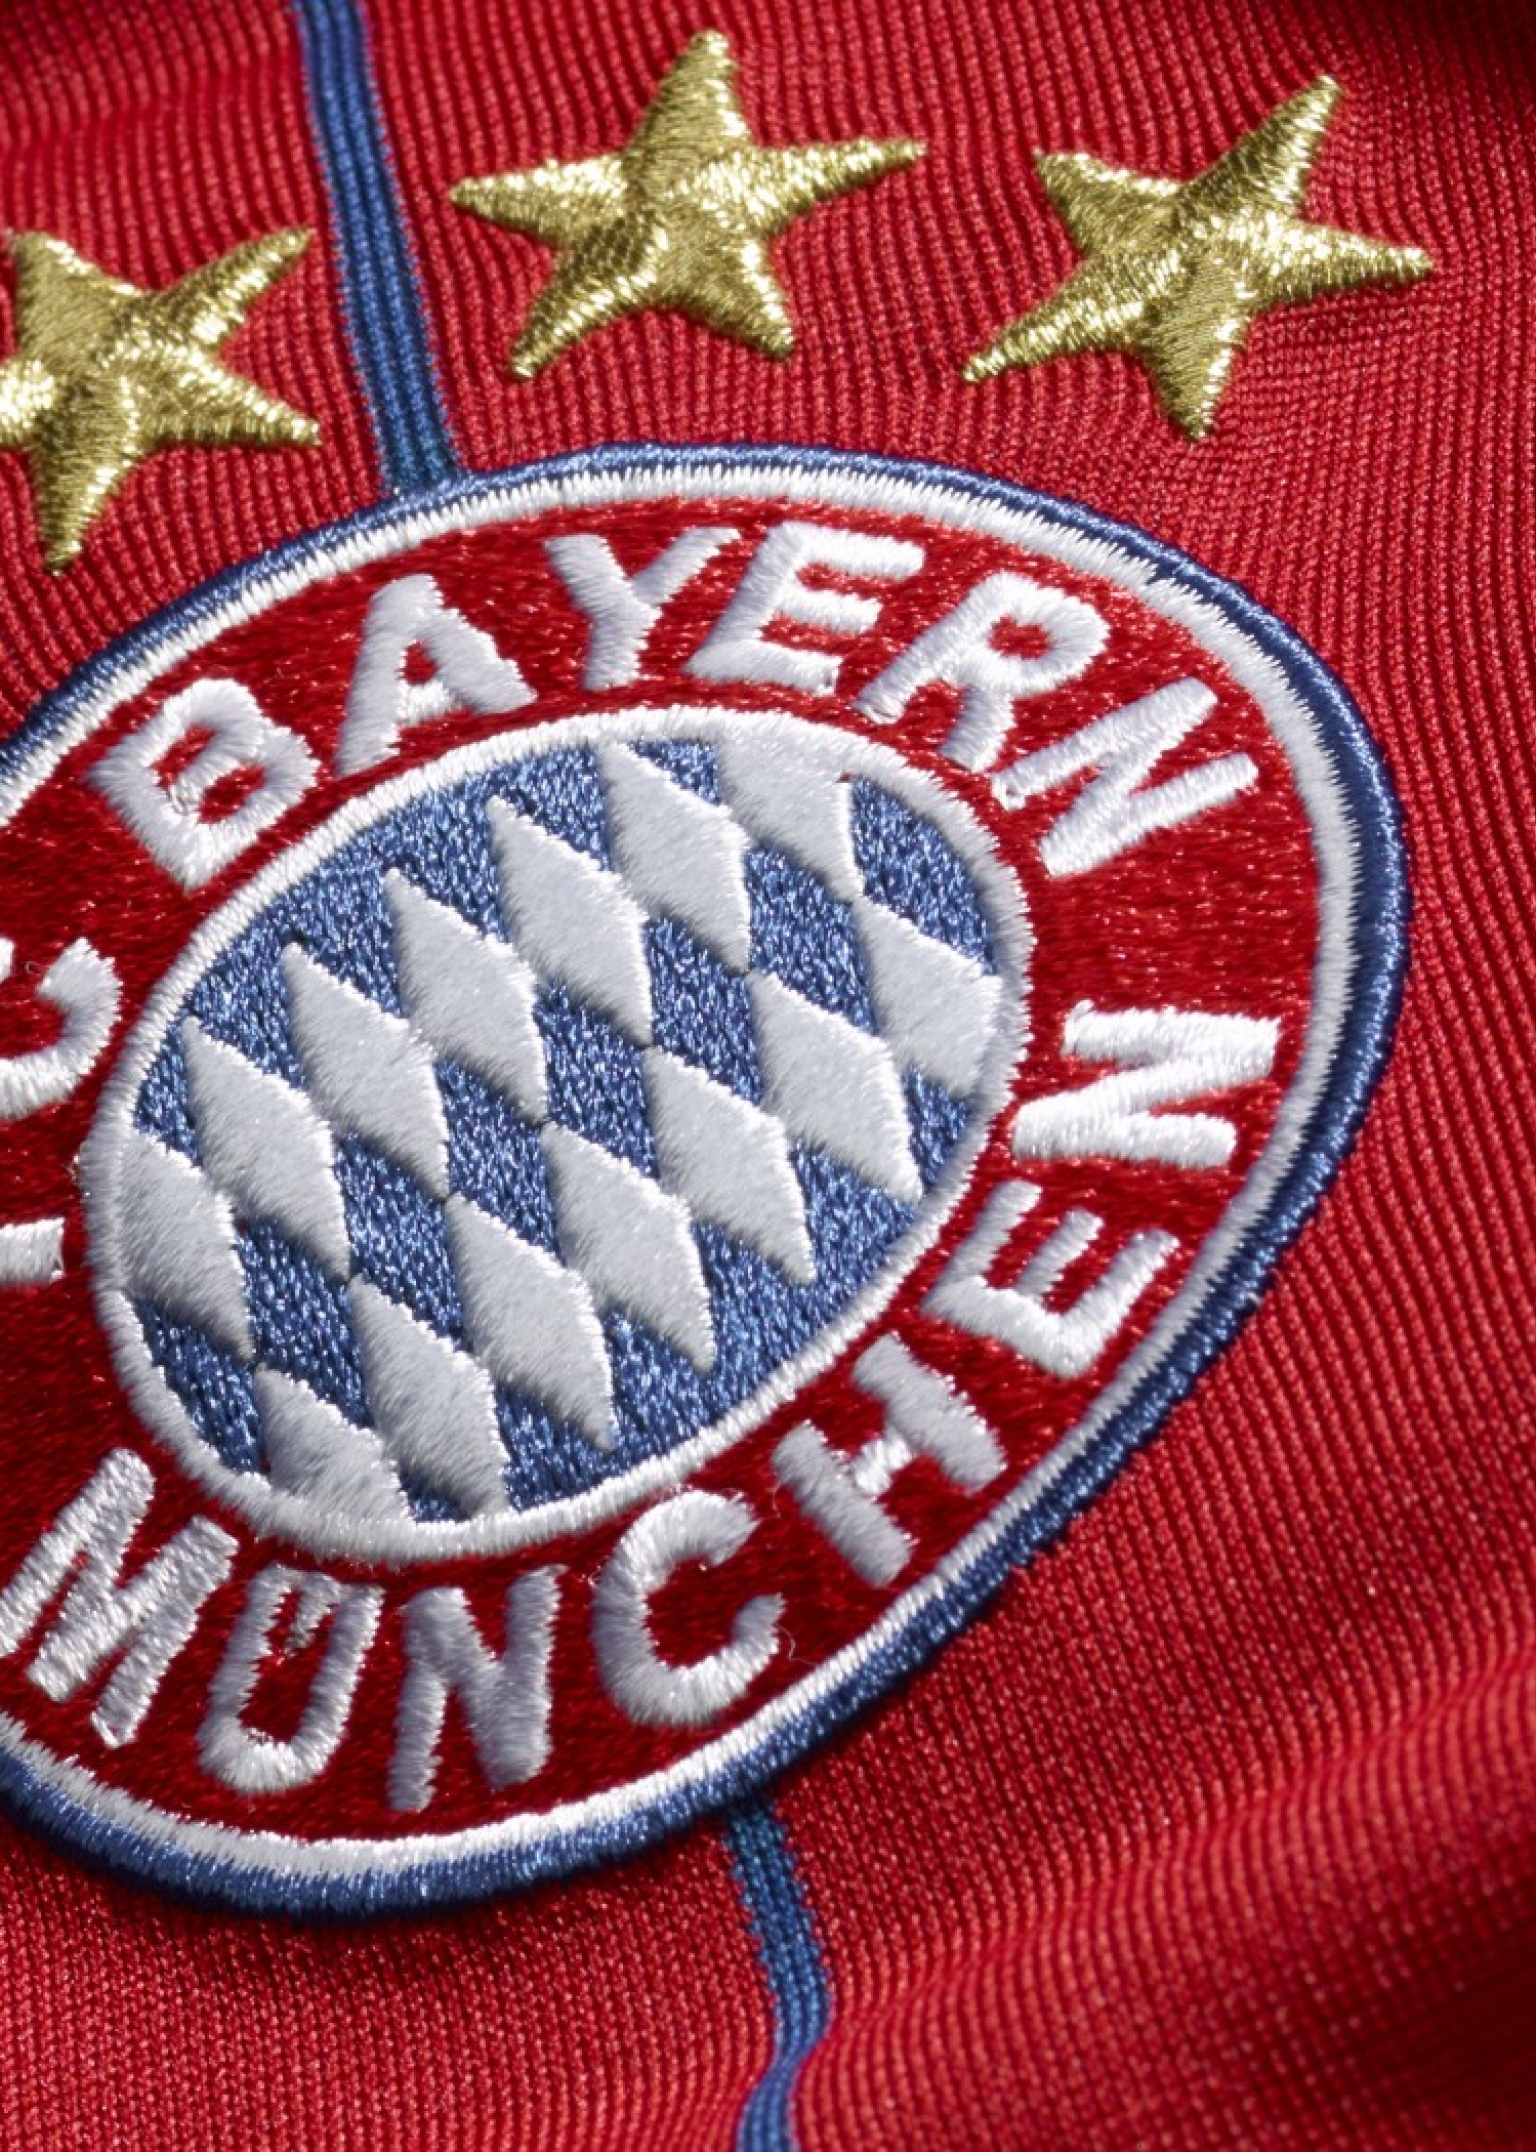 1536x2152 Bayern Munchen Kits 1536x2152 Resolution Wallpaper Hd Sports 4k Wallpapers Images Photos And Background Wallpapers Den